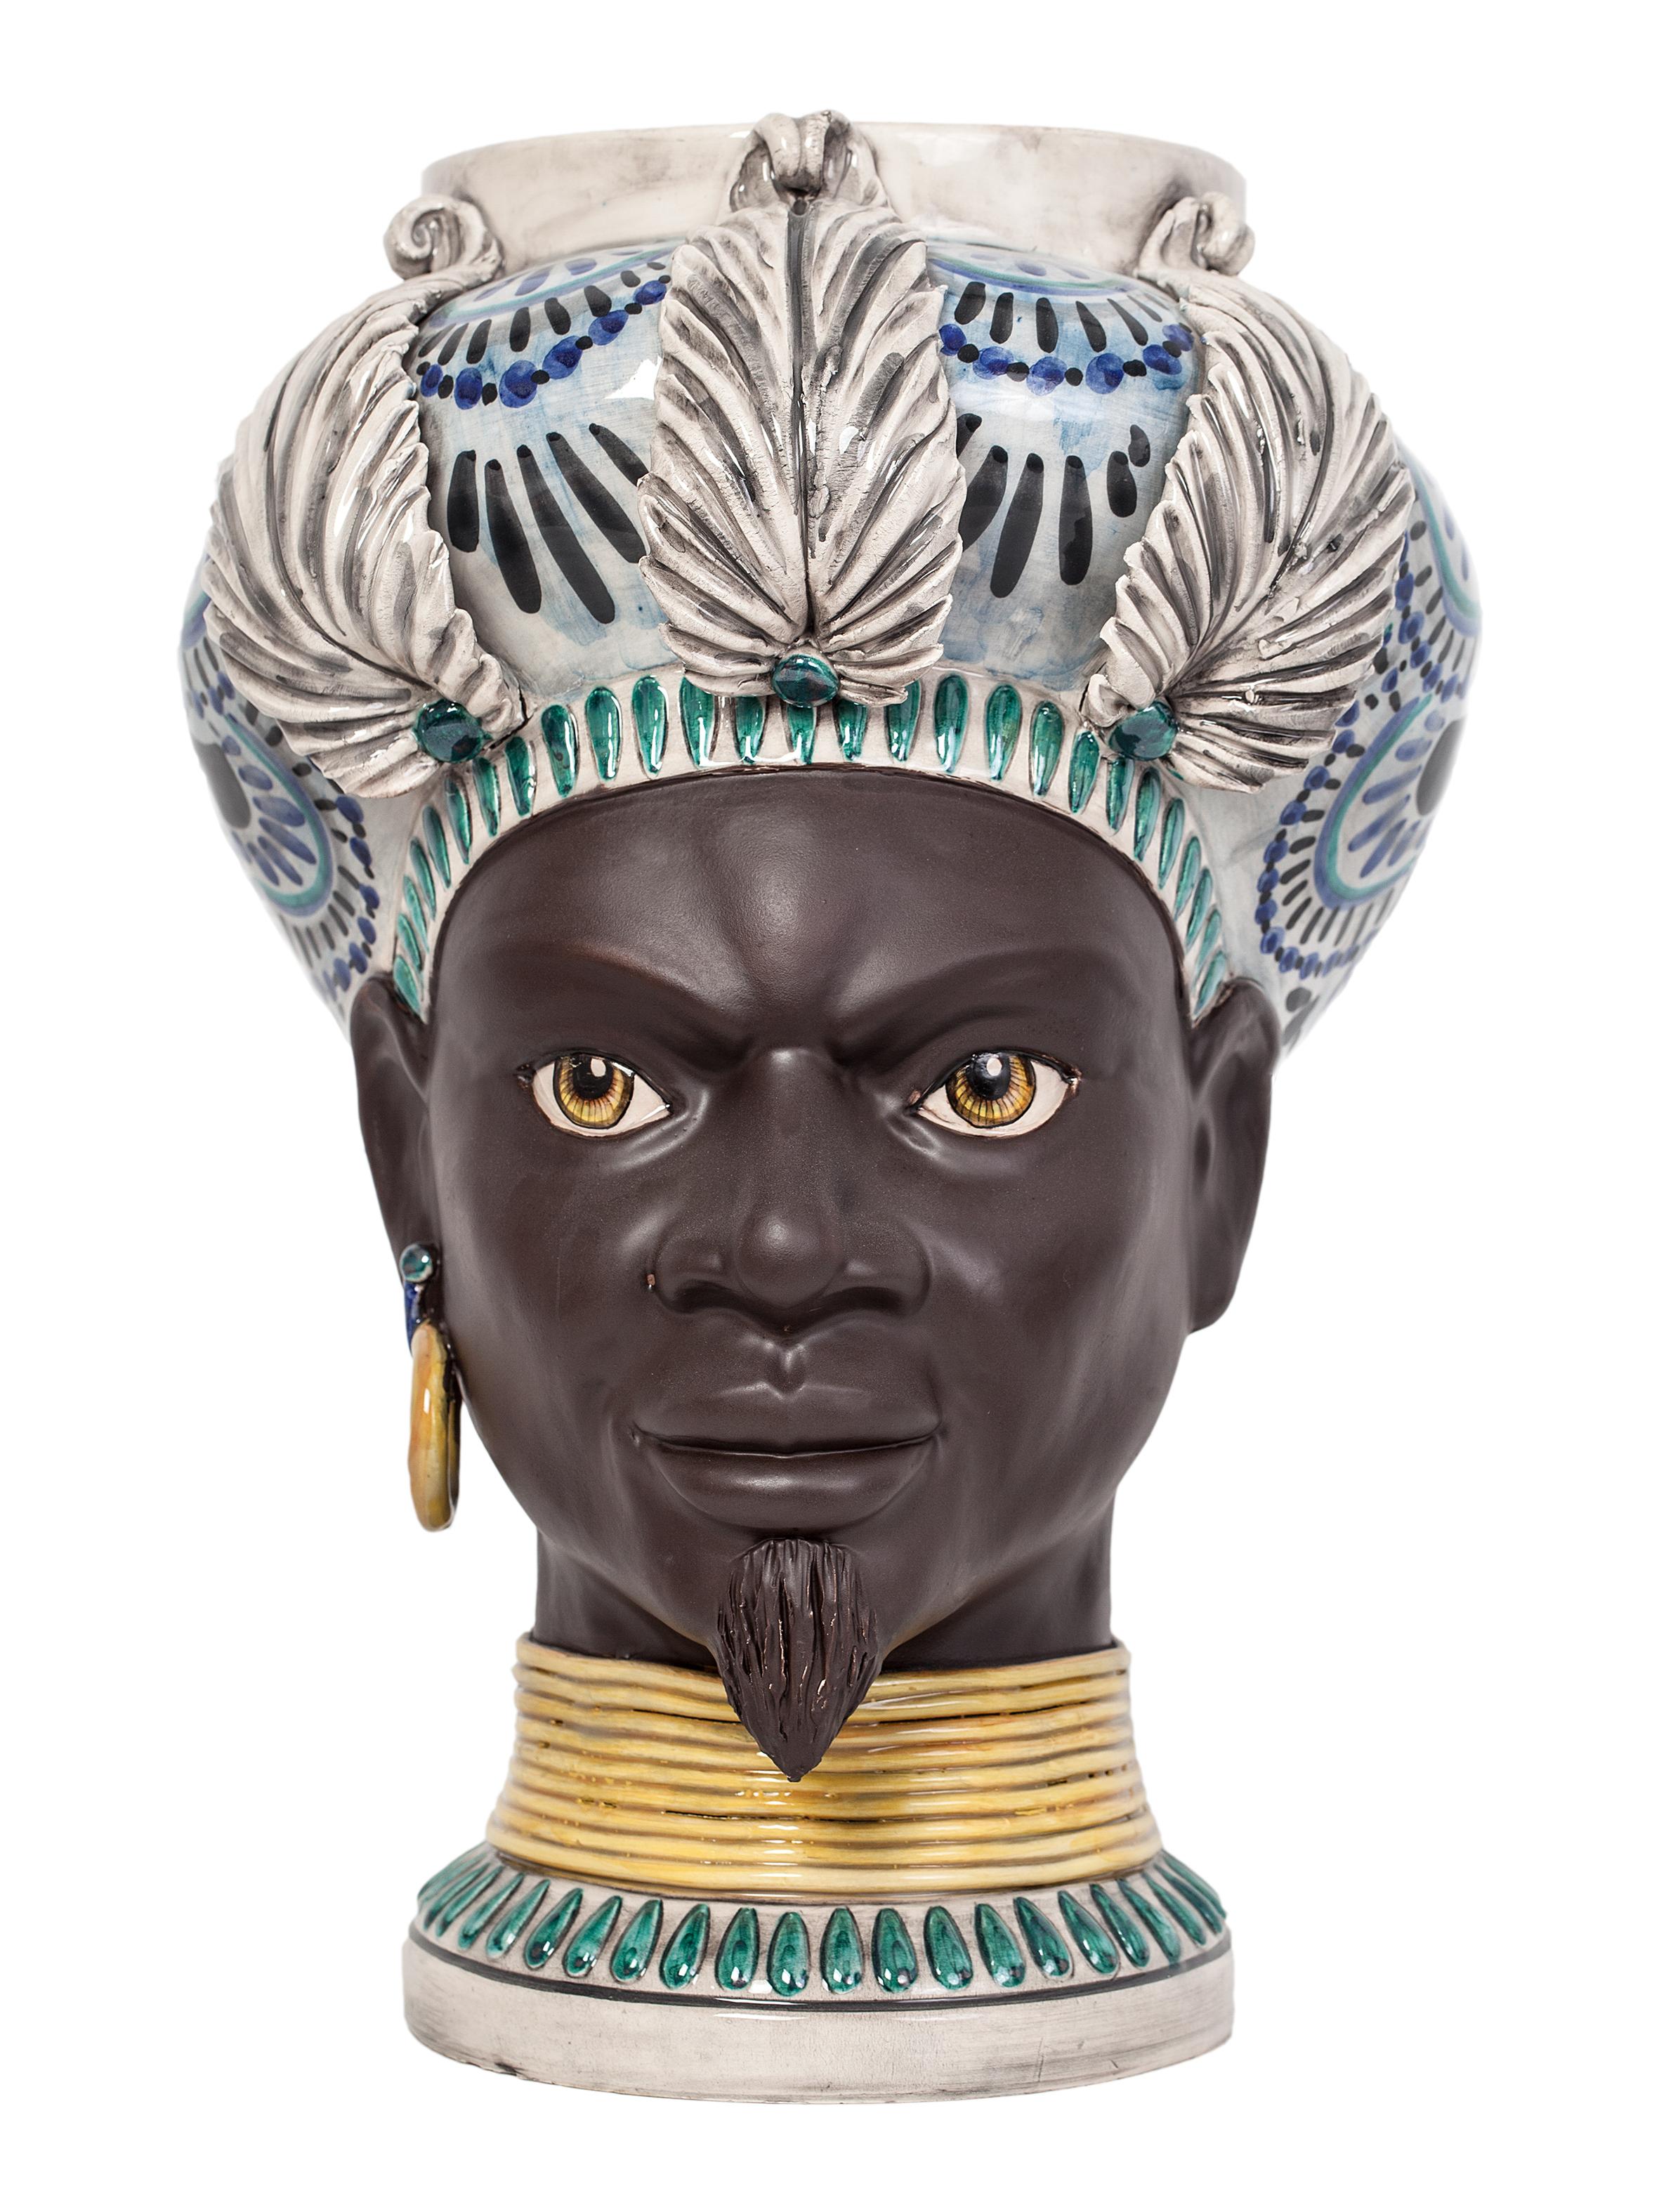 ISIDE I17, Man's Moorish Head, Handmade in Sicily, 2021, Colorful Vase Size M For Sale 8